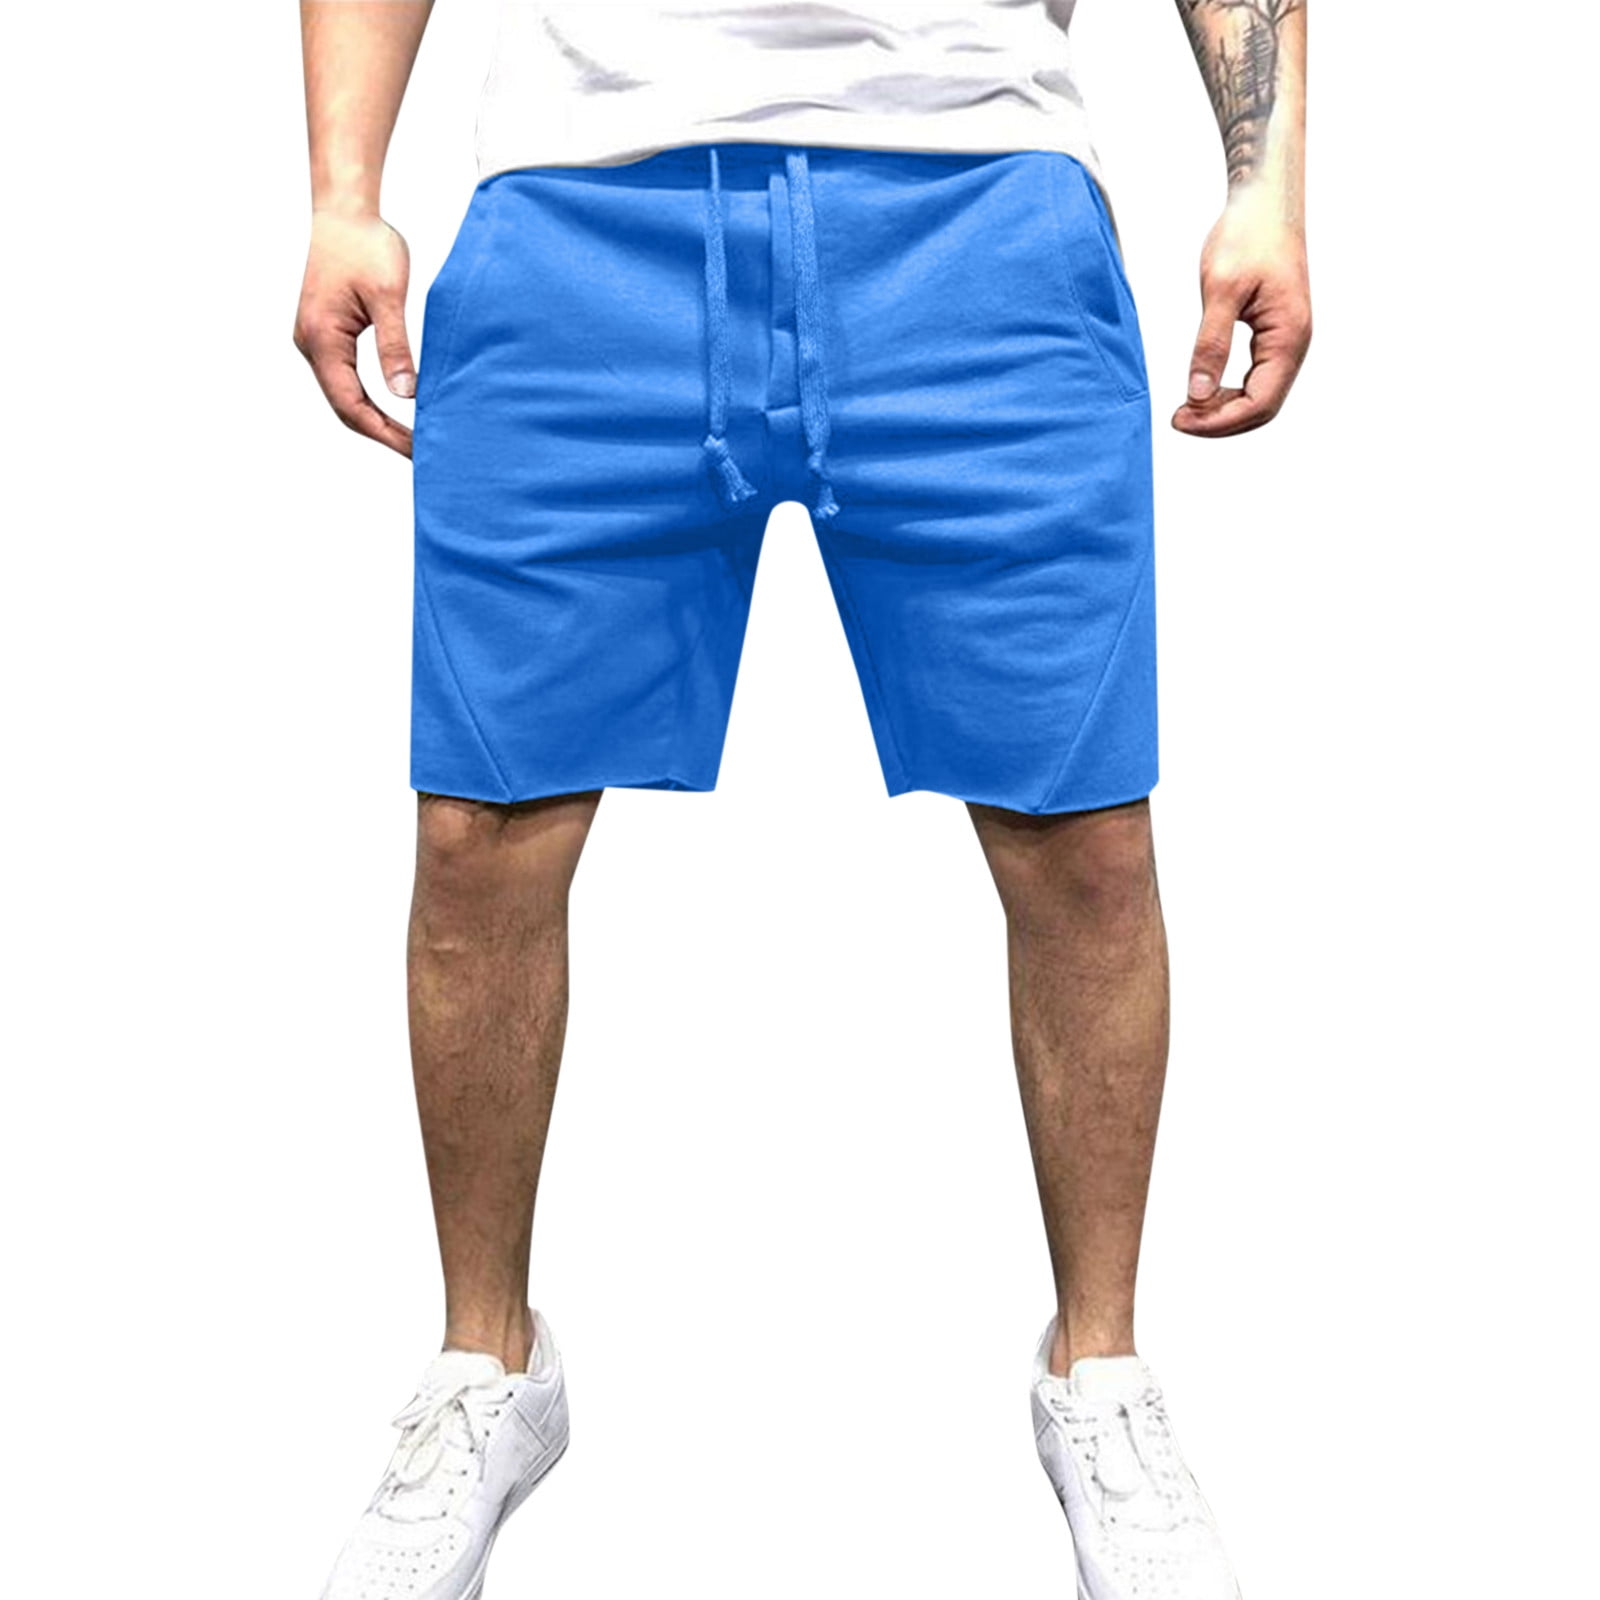 adviicd cotton Shorts Men Men's 11 Inch Relaxed-Fit Stretch-Twill Work  Short Mens Shorts 